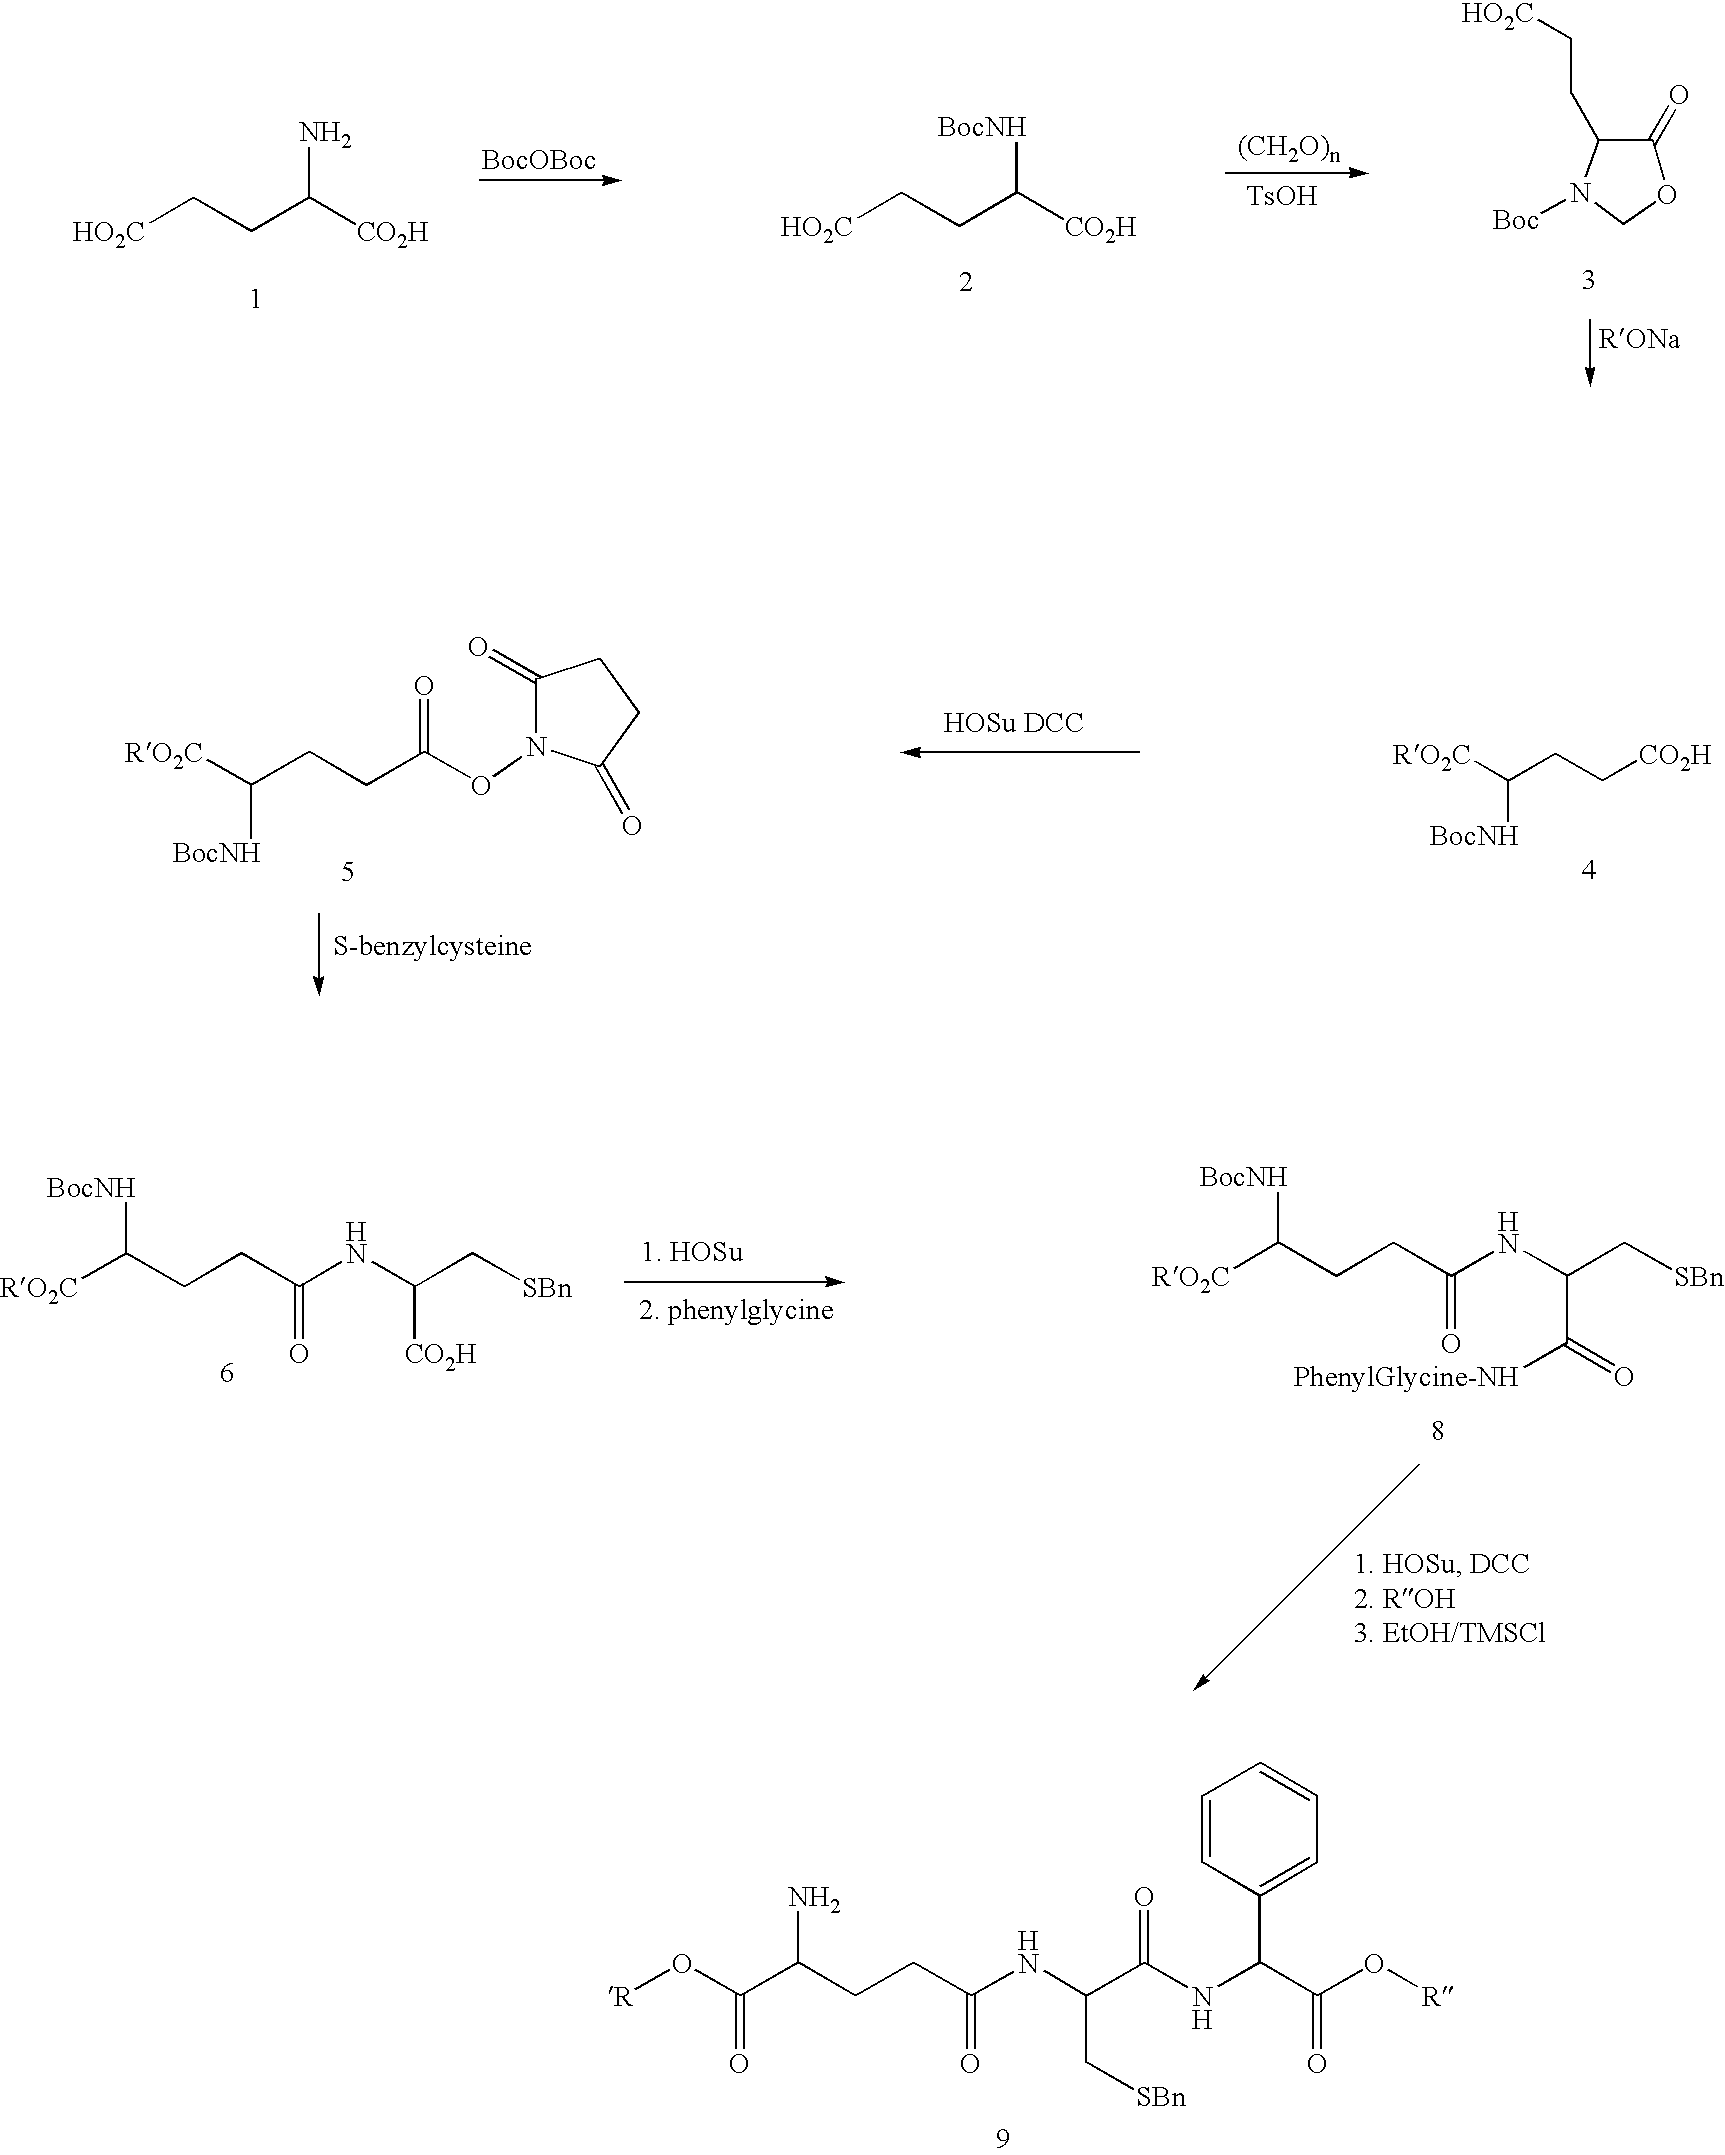 Therapeutic compositions containing glutathione analogs